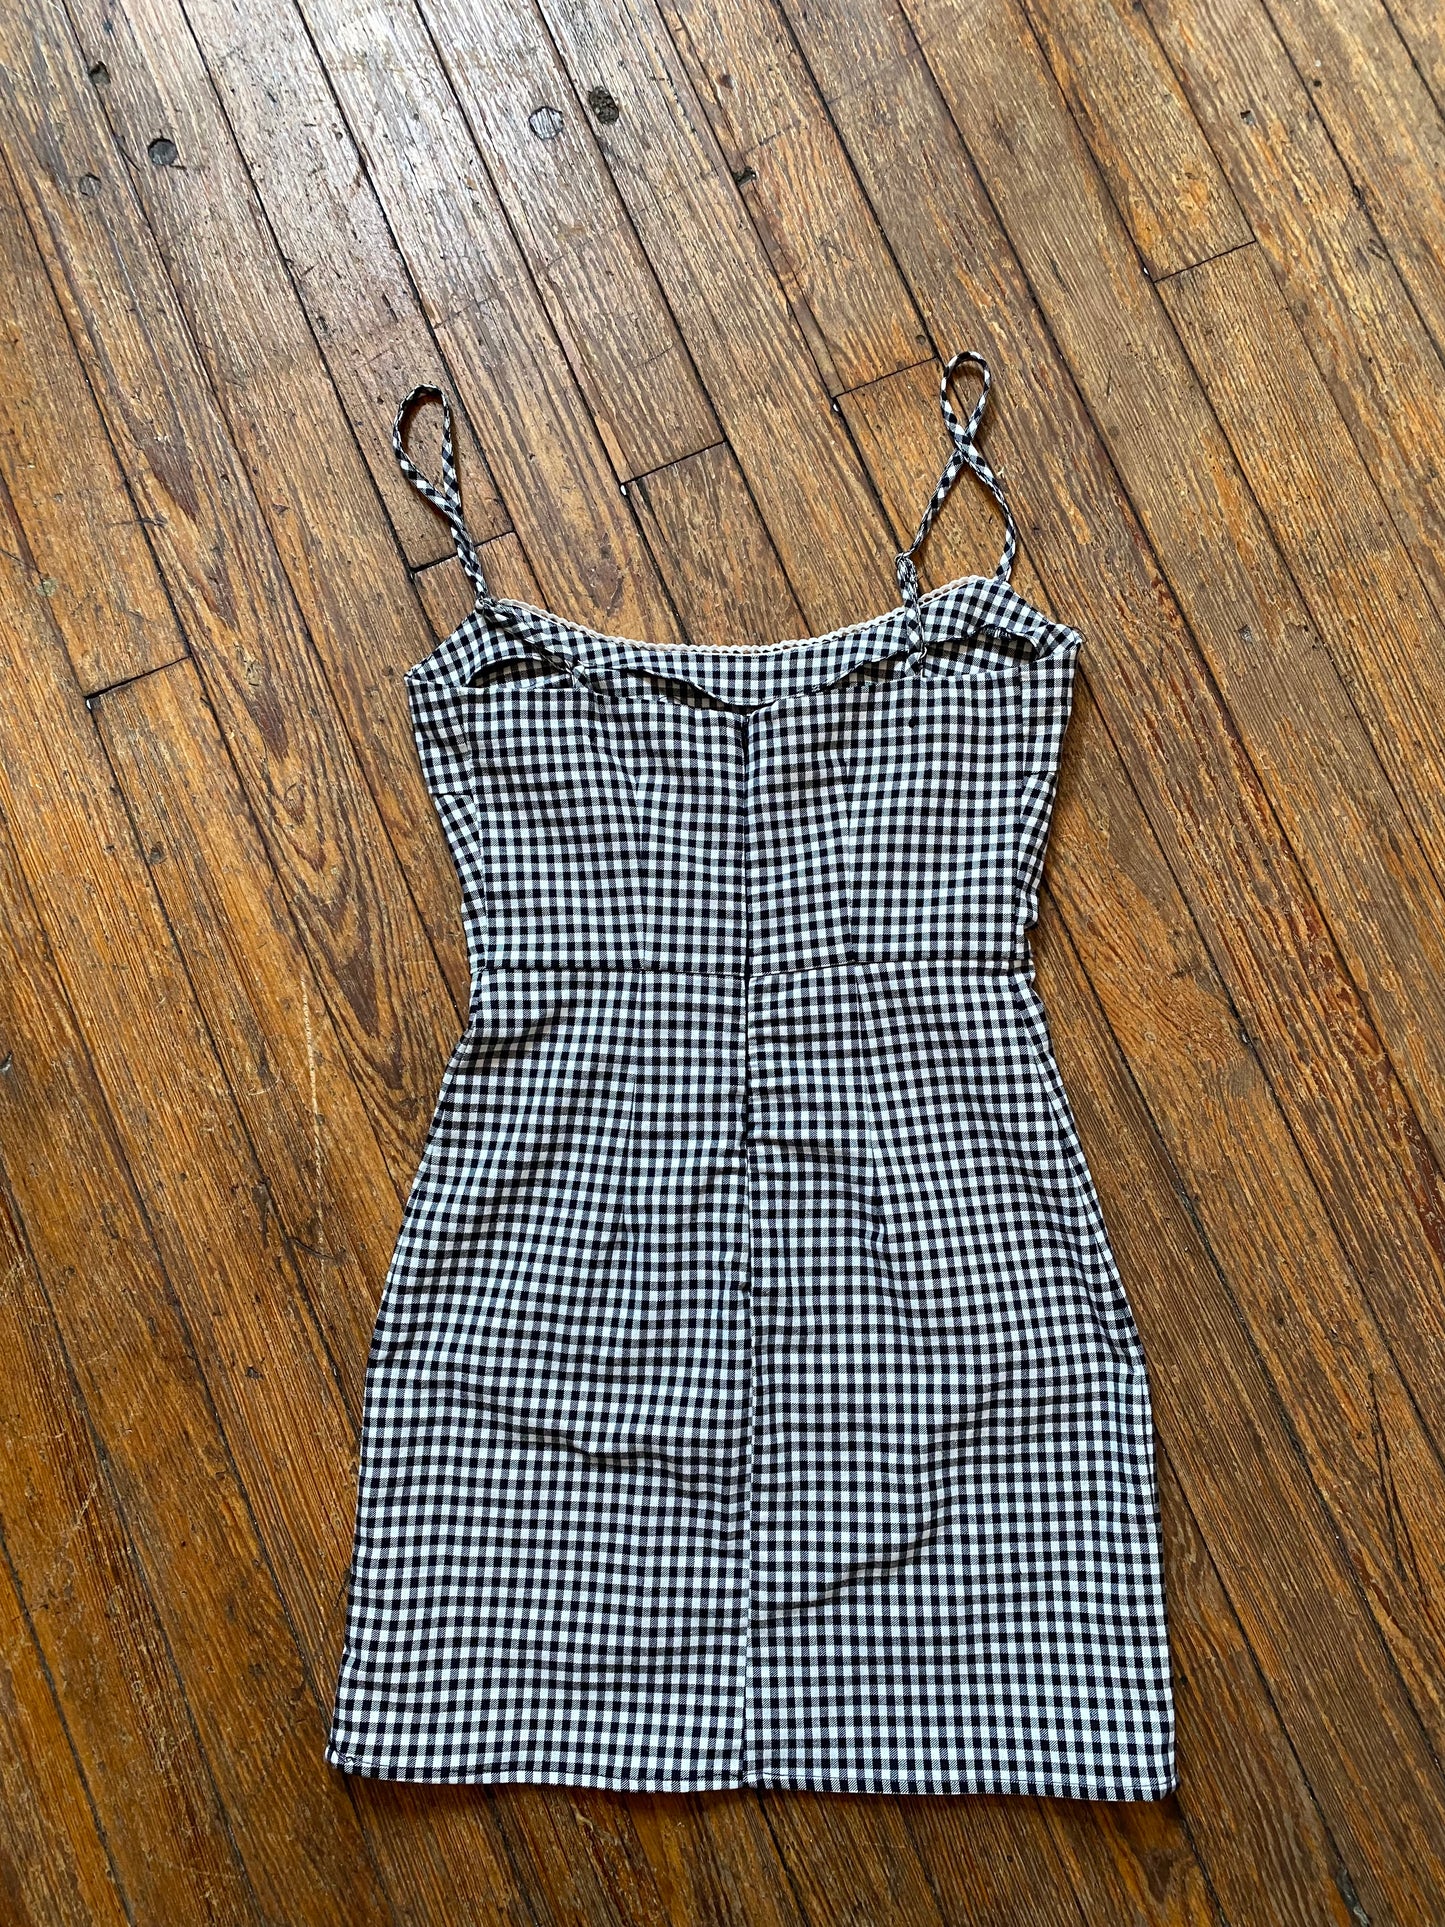 Urban Outfitters Black and White Checkered Mini Dress